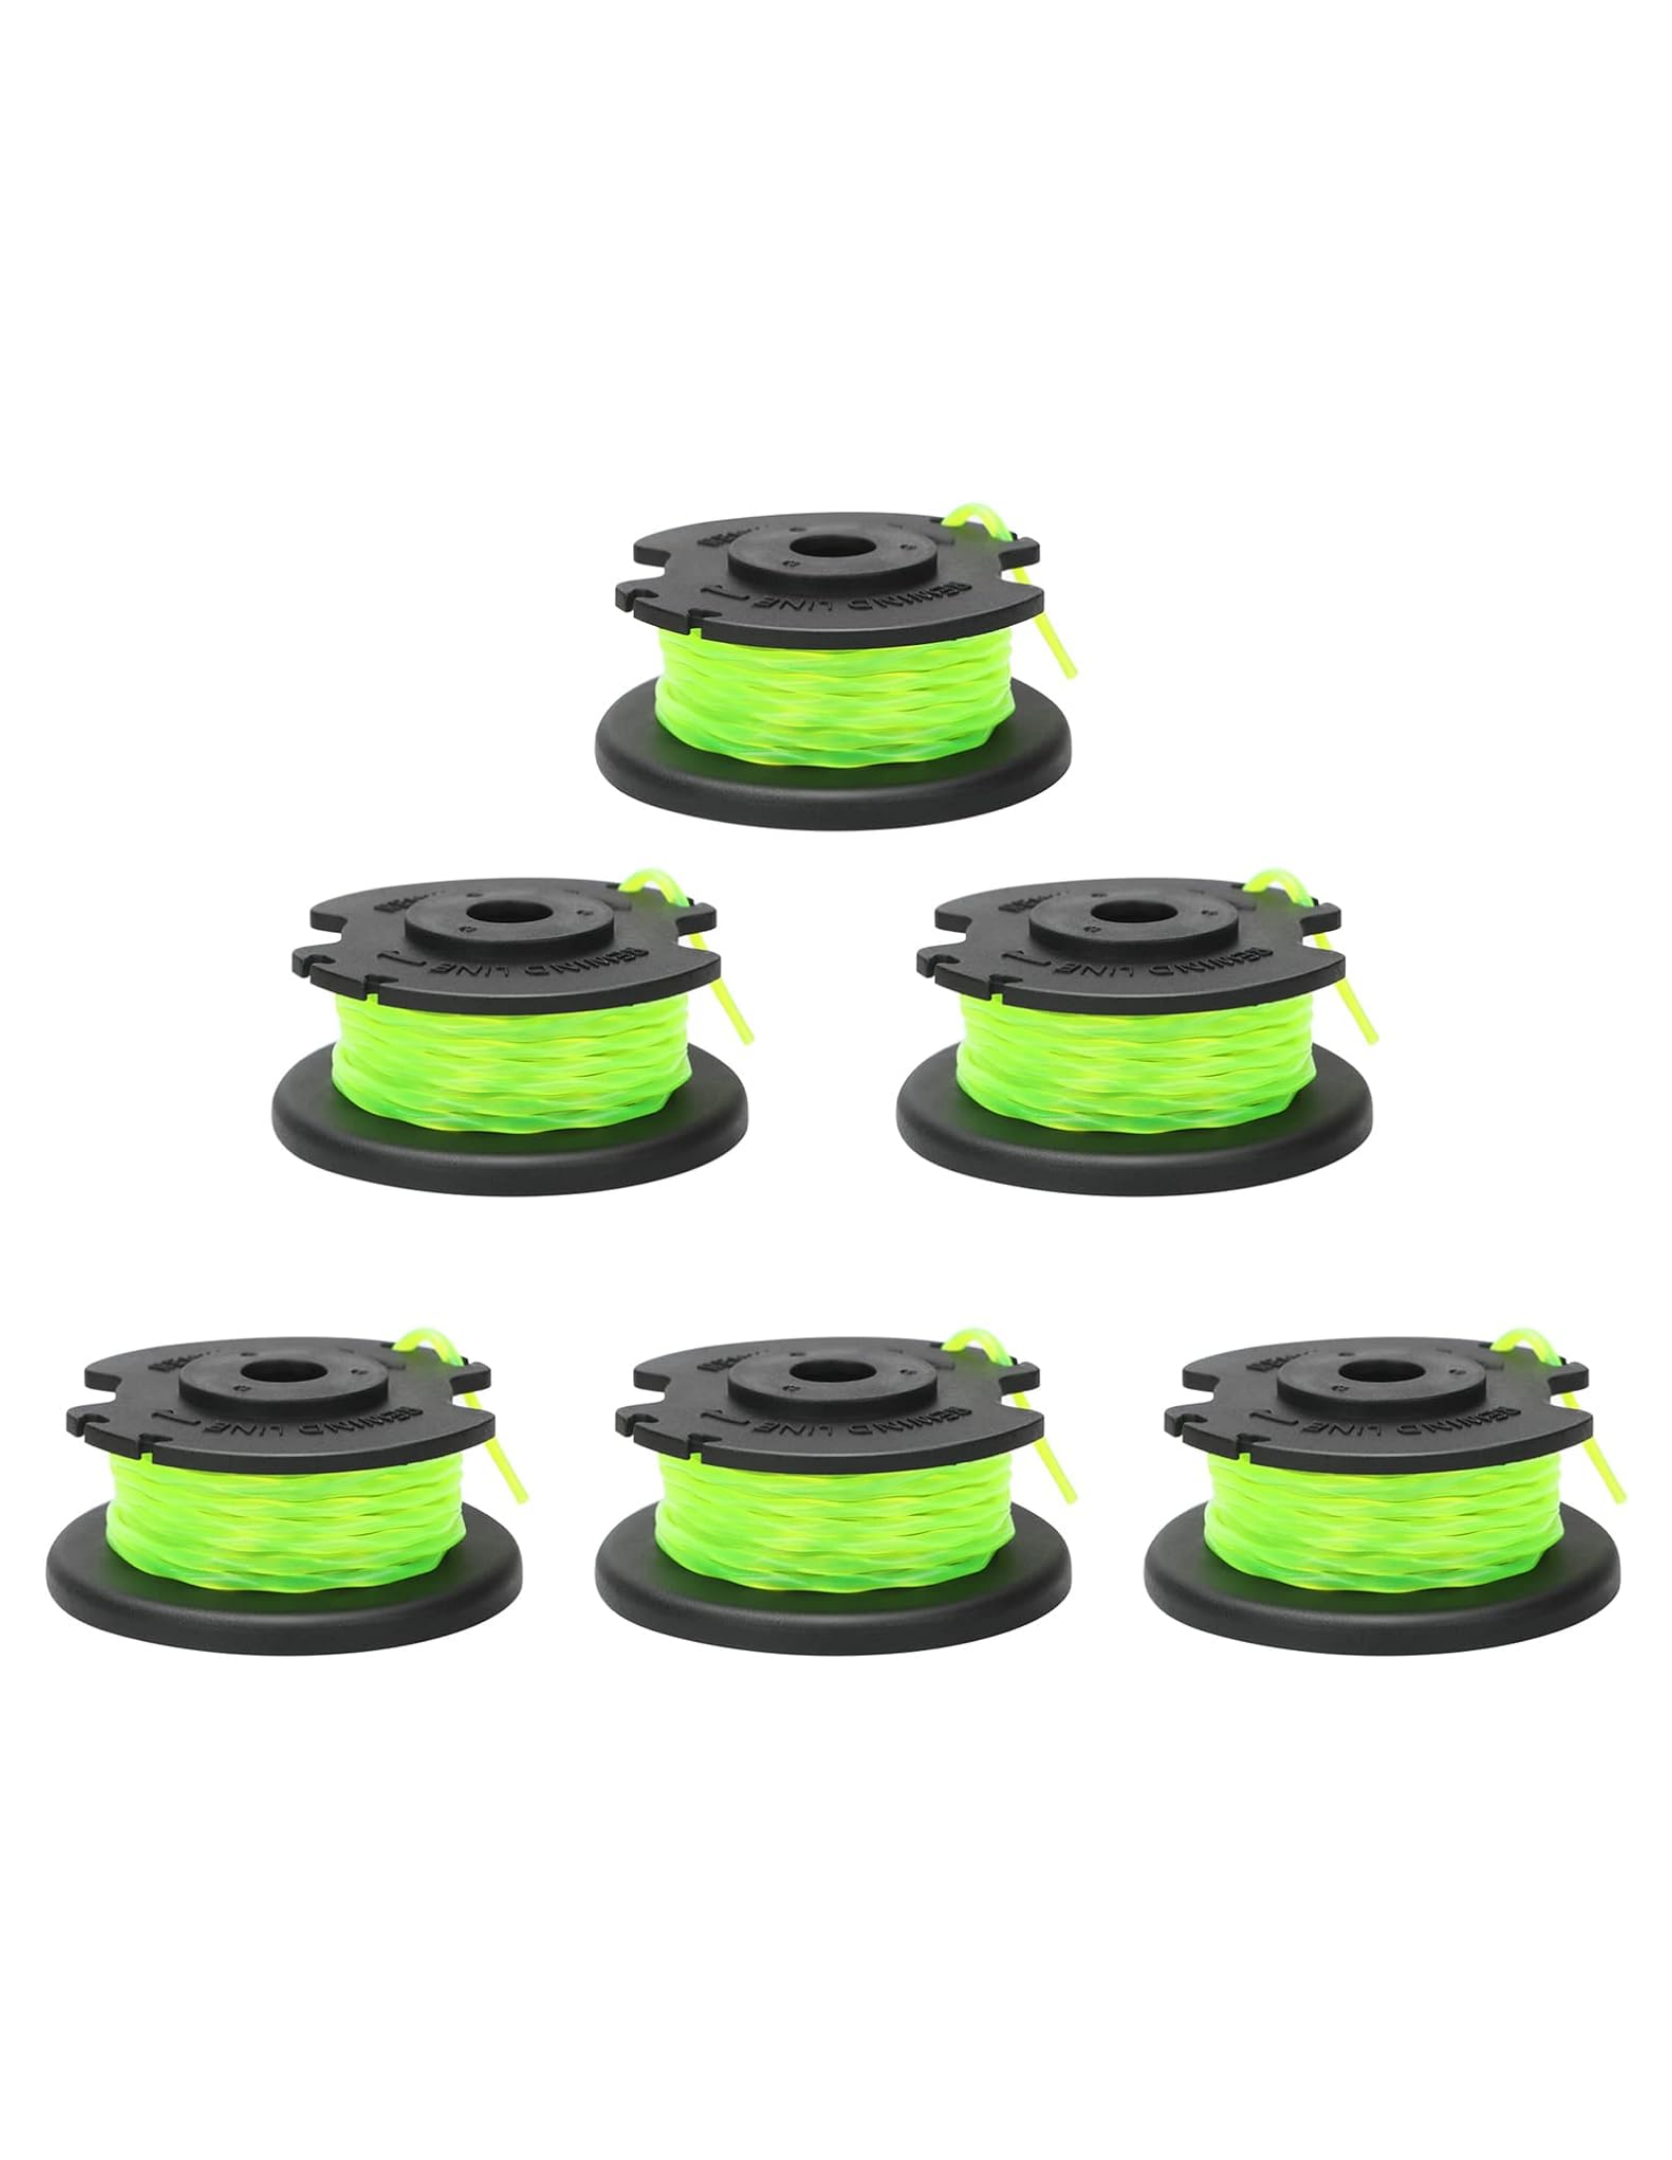 THTEN AC80S3 0.080" 11FT Trimmer Spool Line Compatible with Scotts HLCK0118 HLST01 Homelite 310917007 Single Line String Trimmer Spool 6 Pack